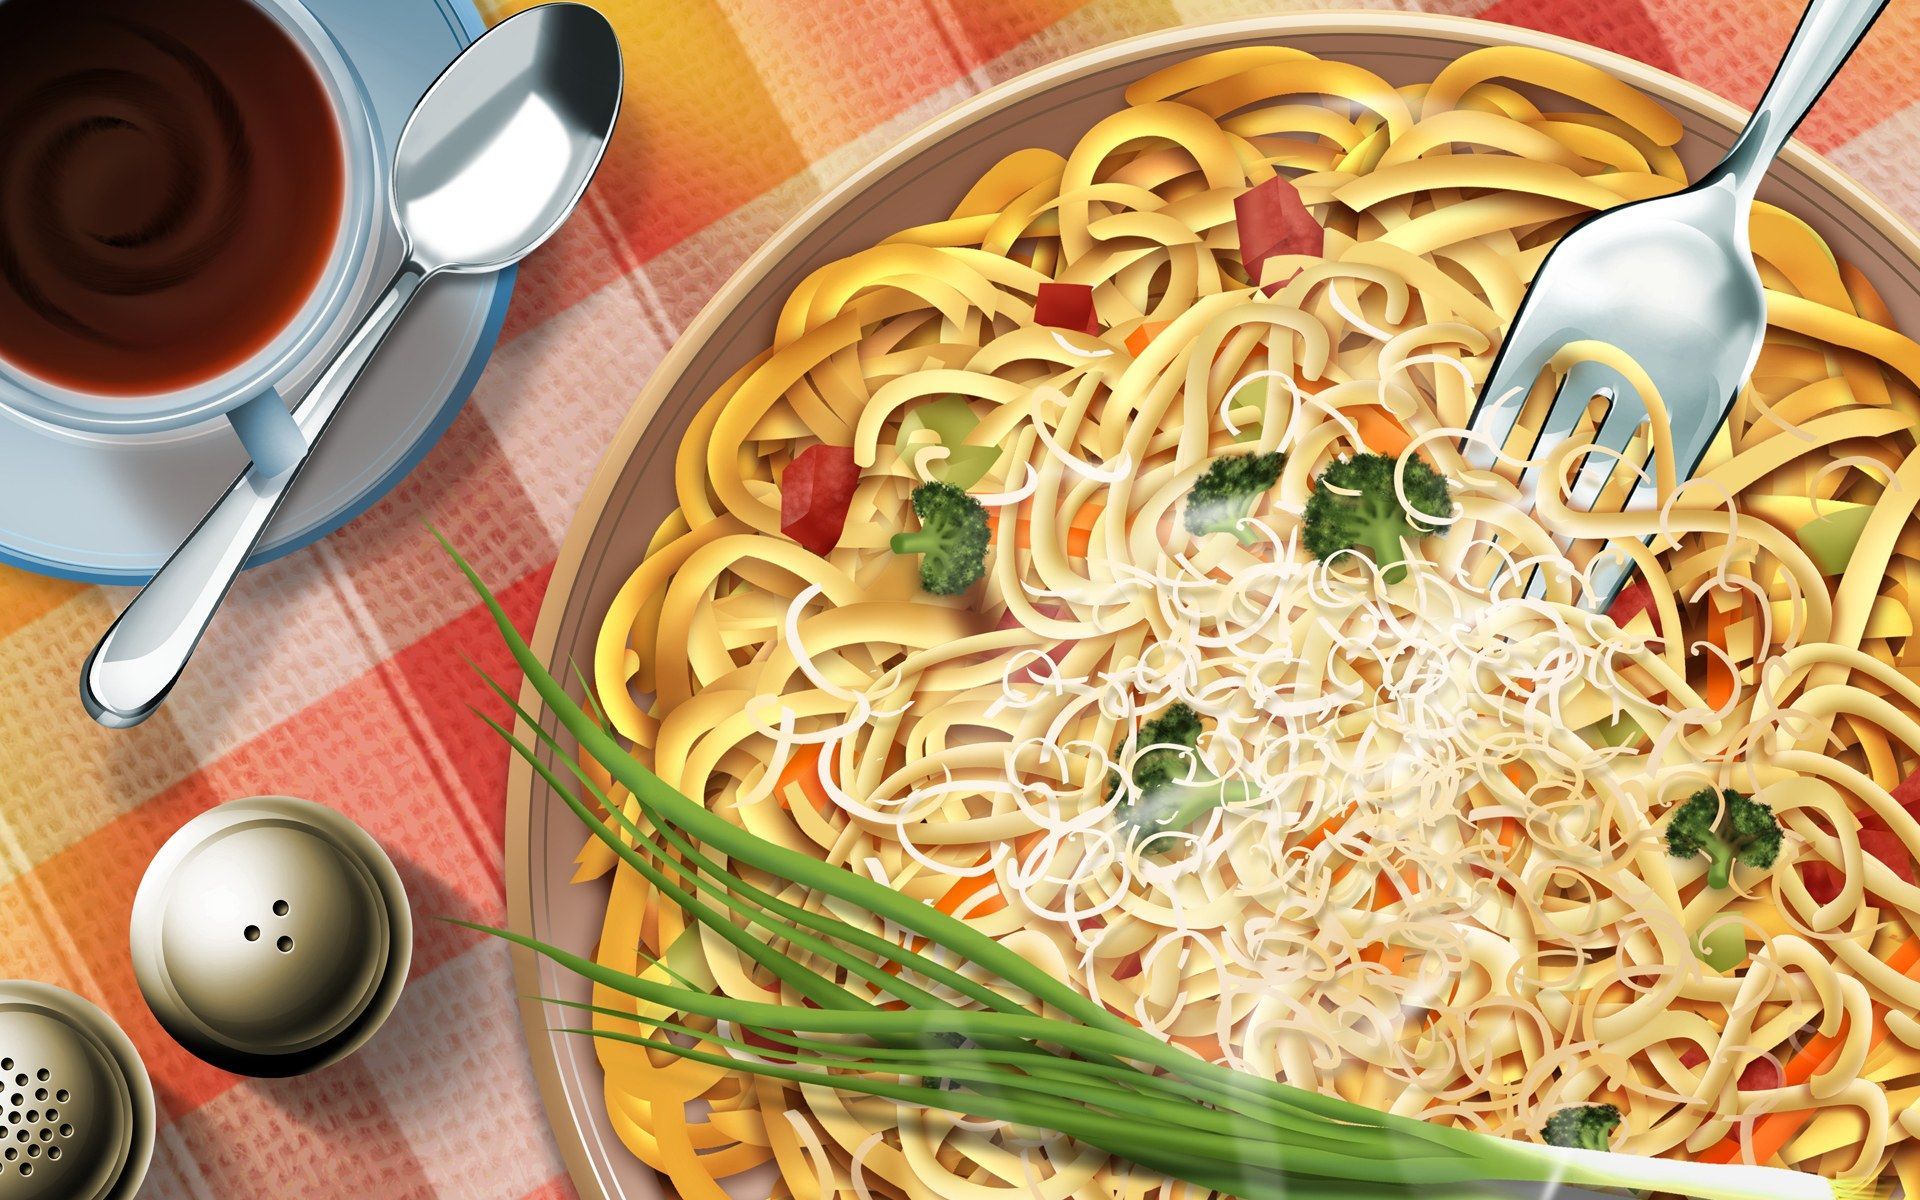 A plate of noodles with vegetables and cheese - Pasta